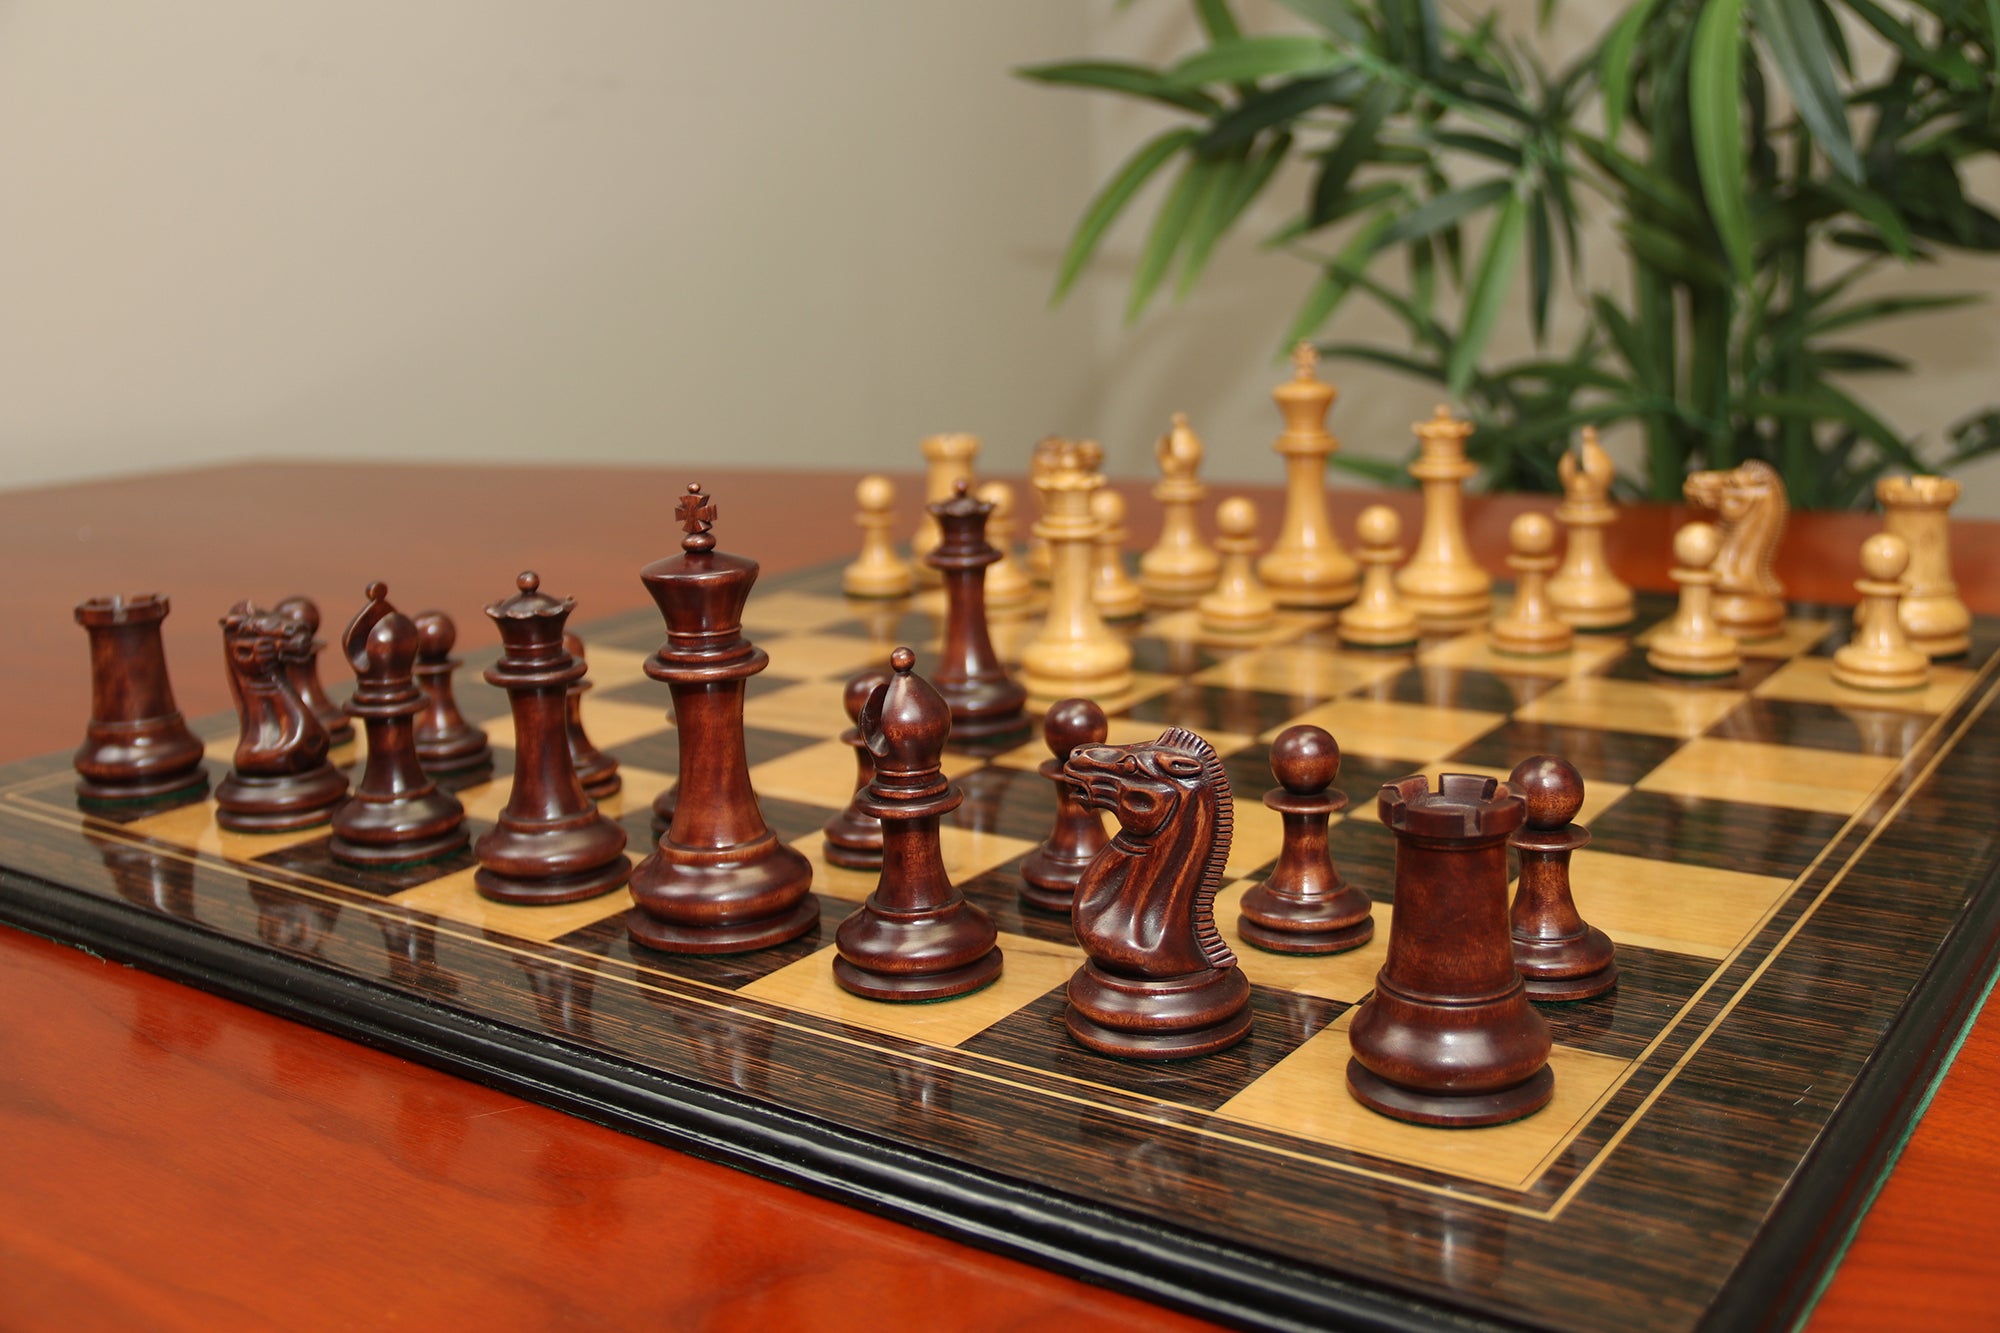 Nathaniel 1849 Antique Reproduction Vintage 4.4" Distressed/Mahogany Wood Chess Pieces